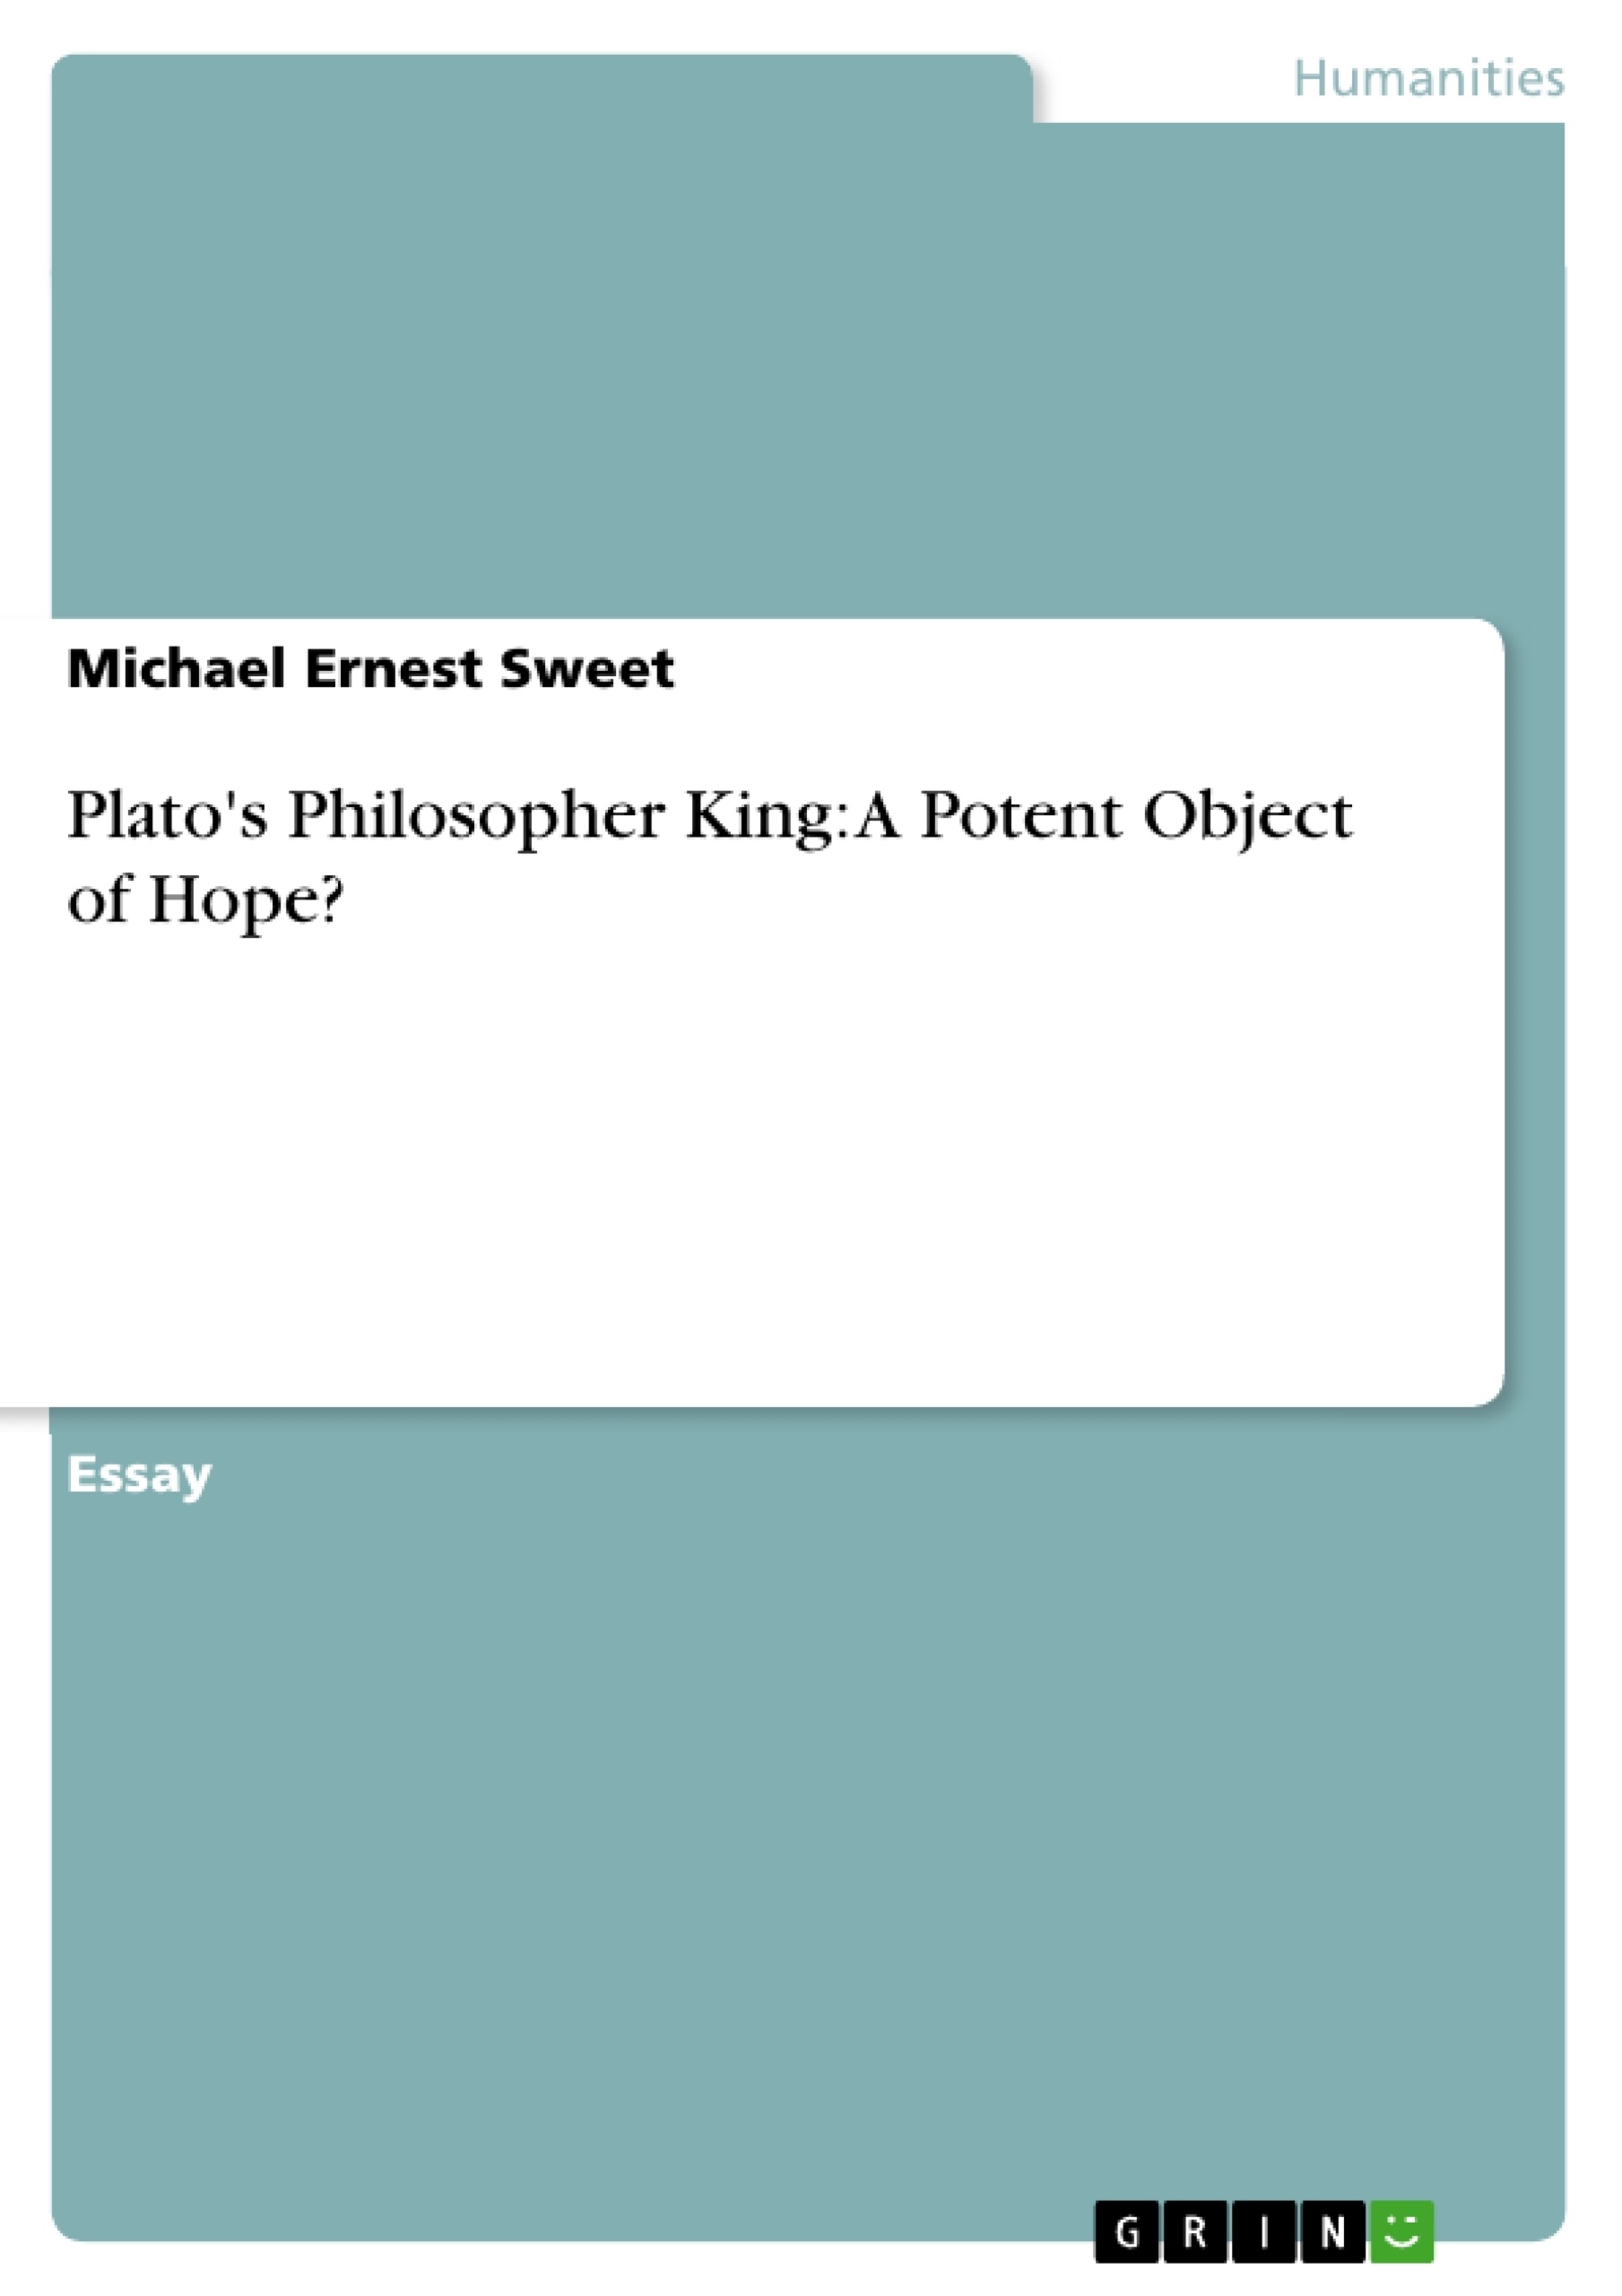 Título: Plato's Philosopher King: A Potent Object of Hope?